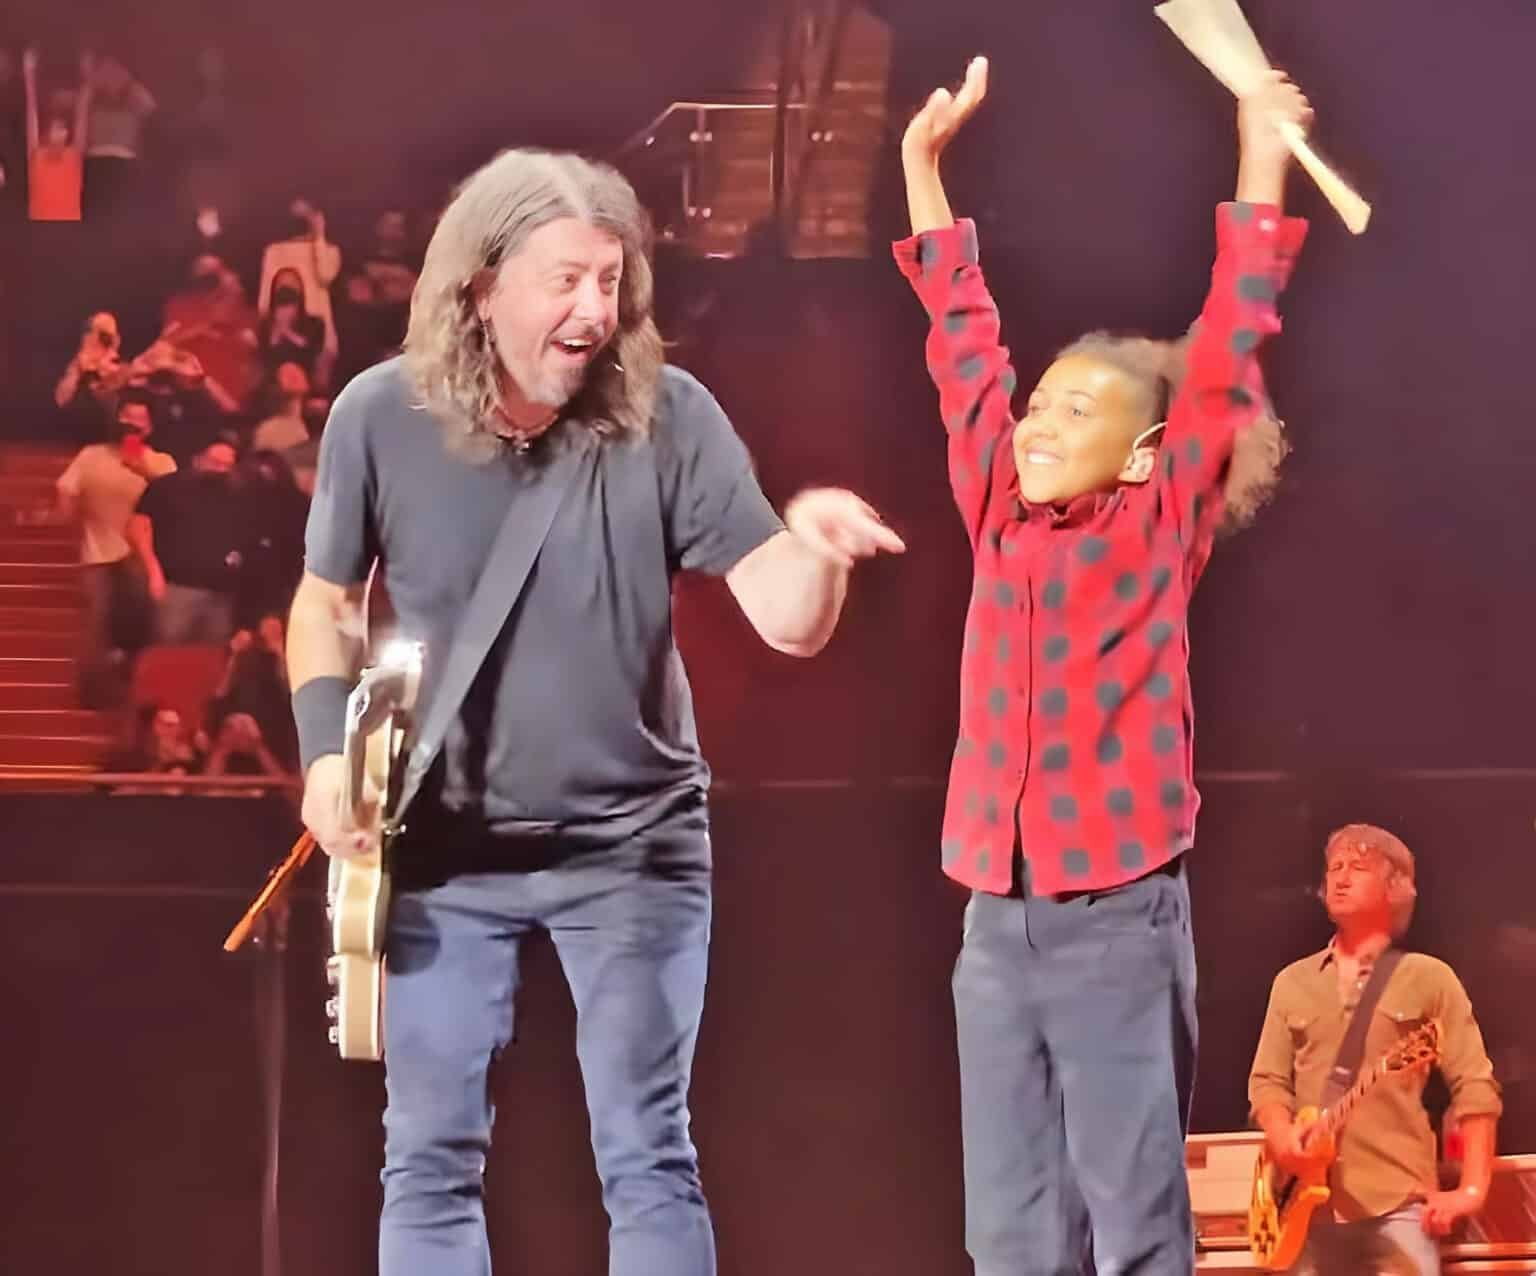 dave grohl and 11 years old